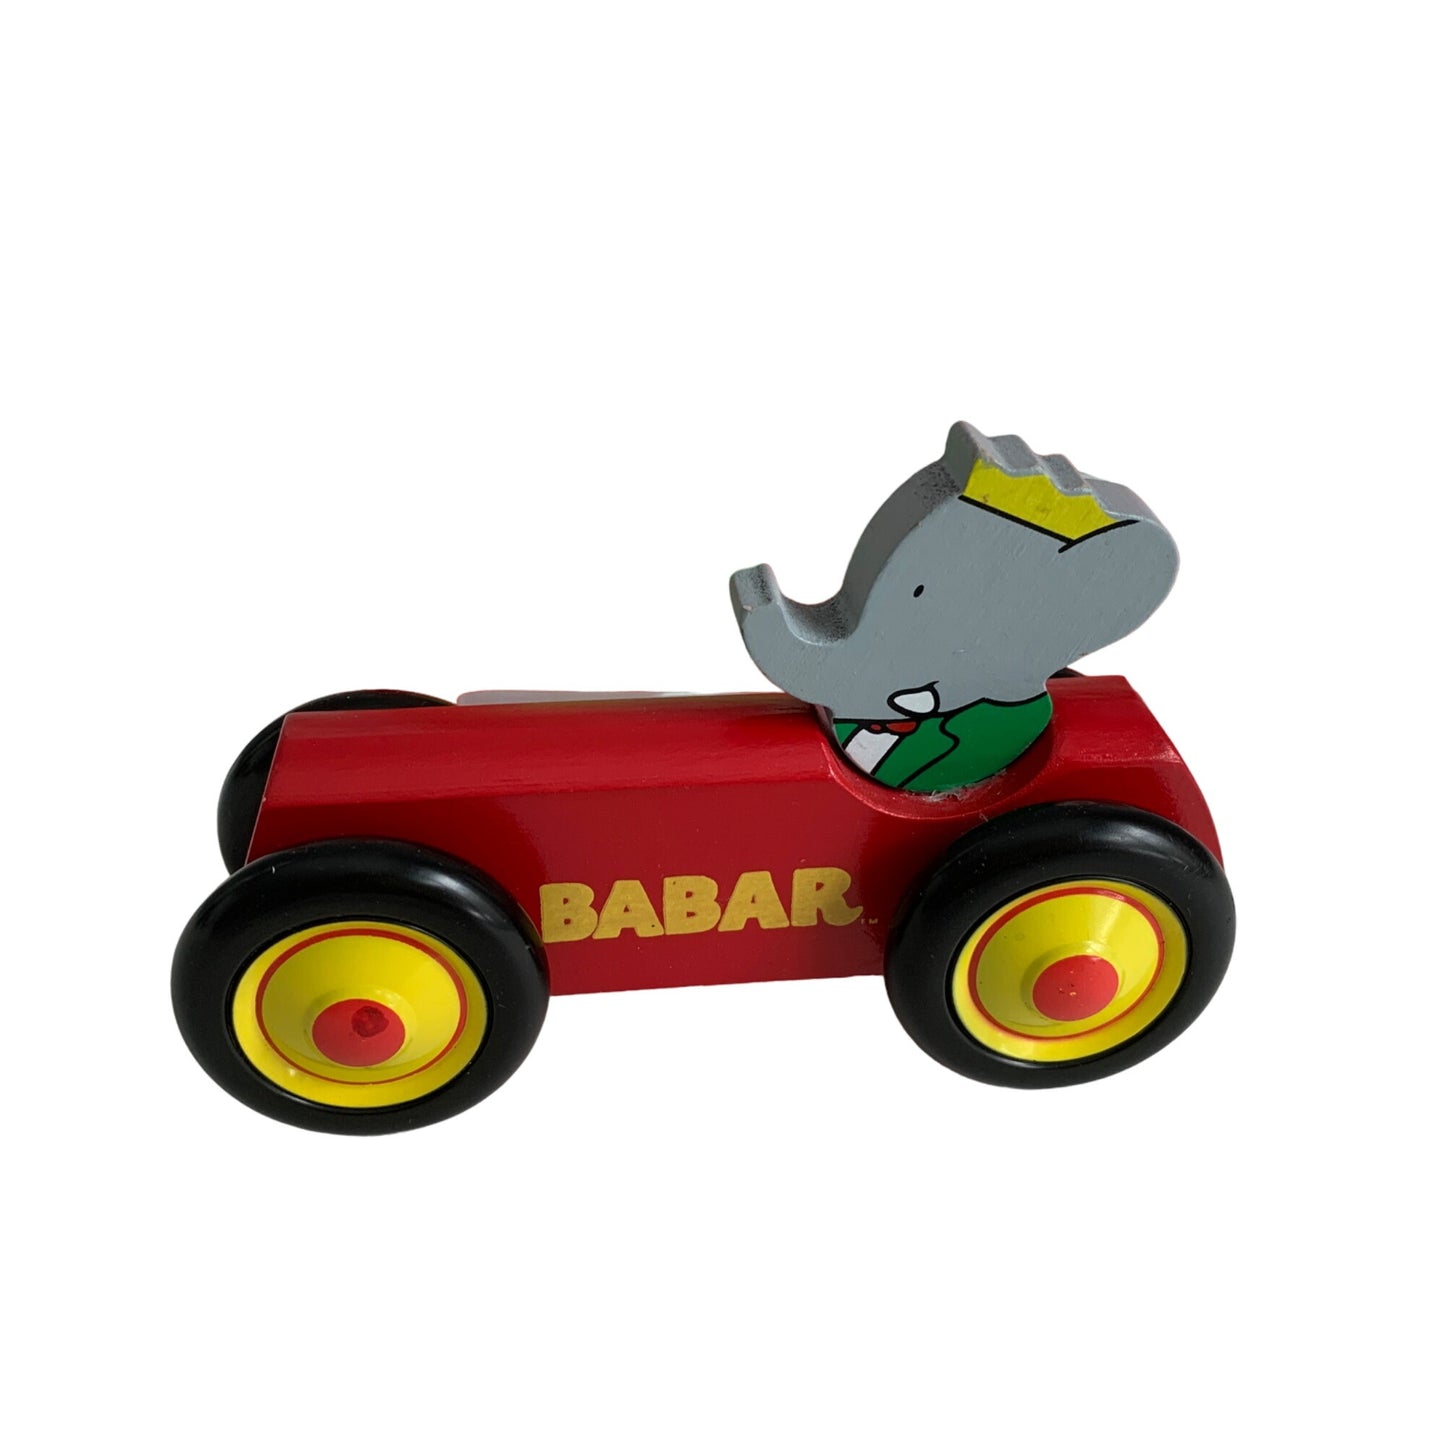 Barbar's Book of Color Plus Barbar Wooden Car Toy